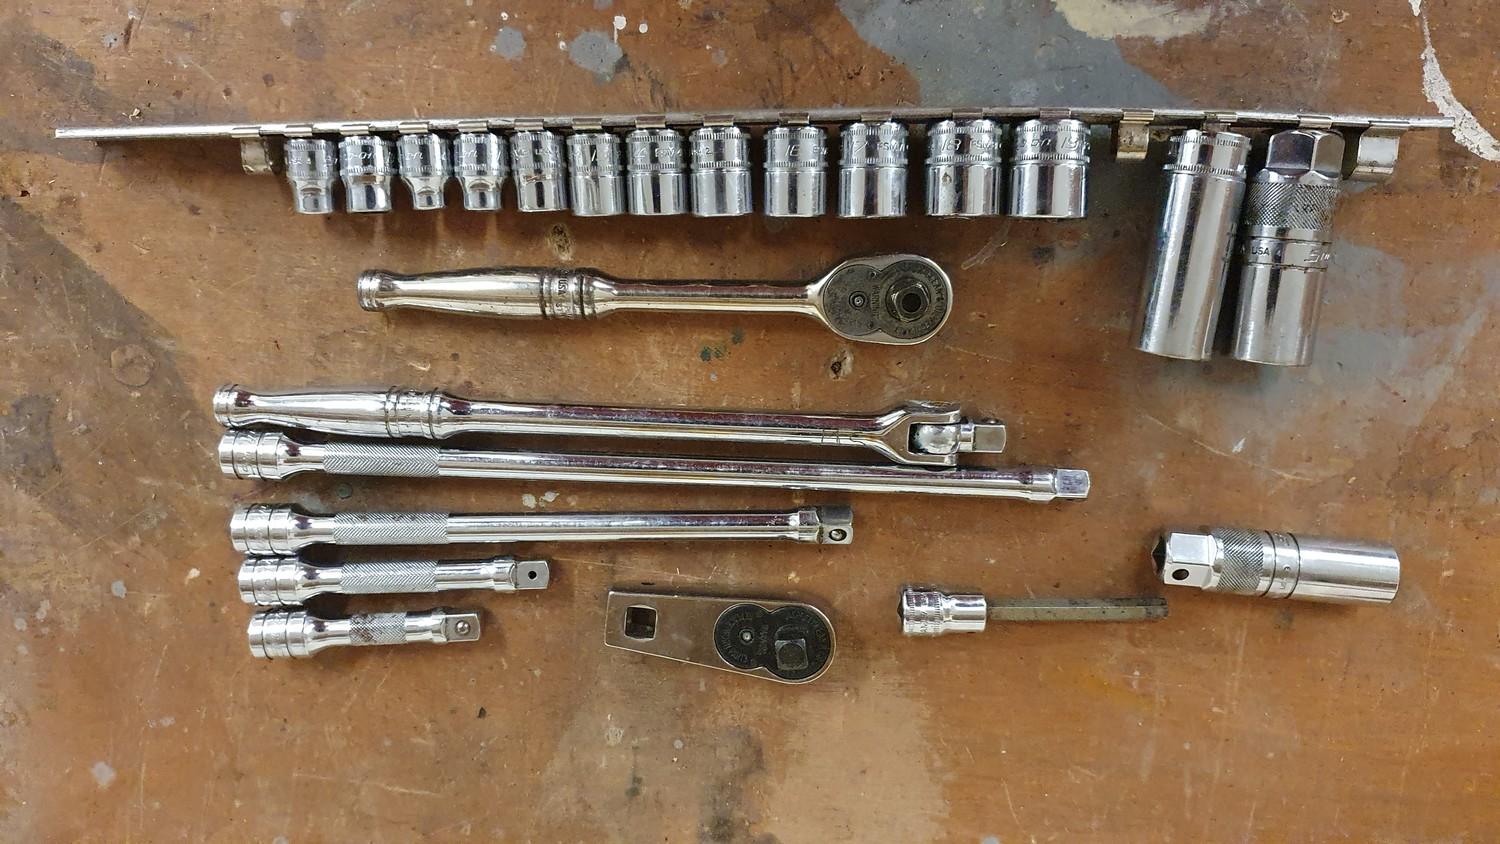 A Snap On 3/8" drive ratchet, various metric sockets and bars.